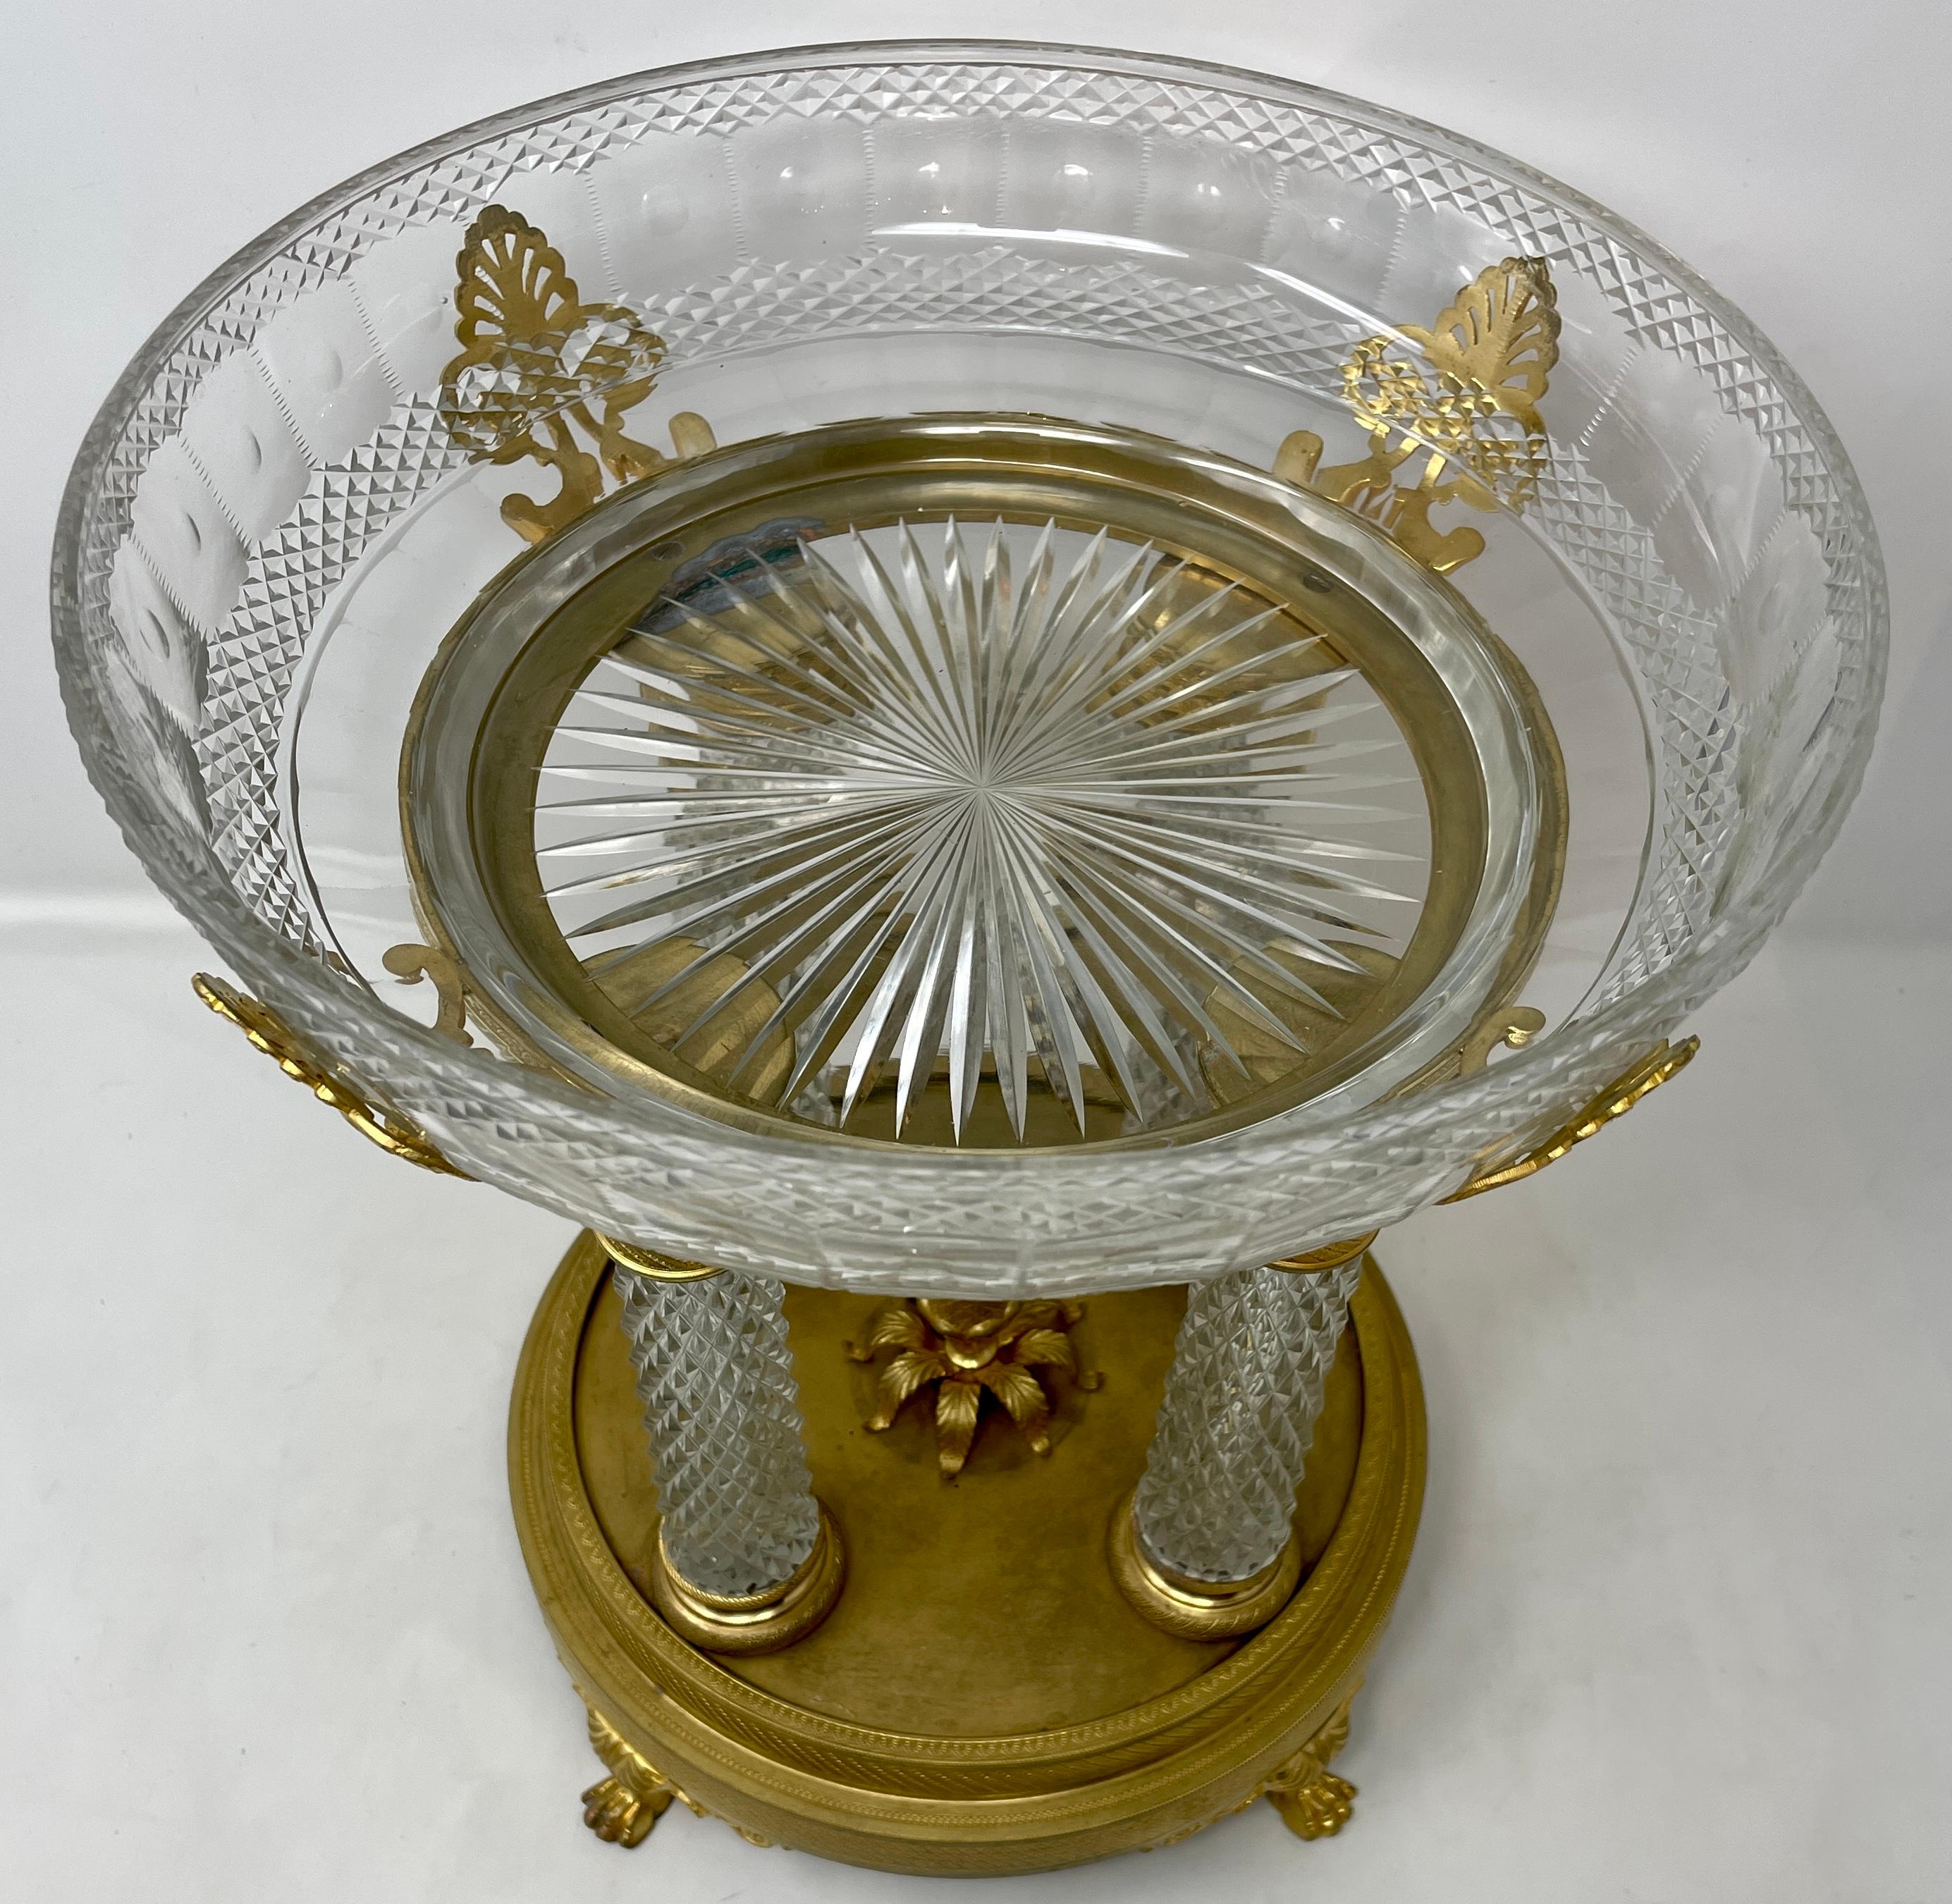 Antique French baccarat crystal and bronze d' ore centerpiece, circa 1890.